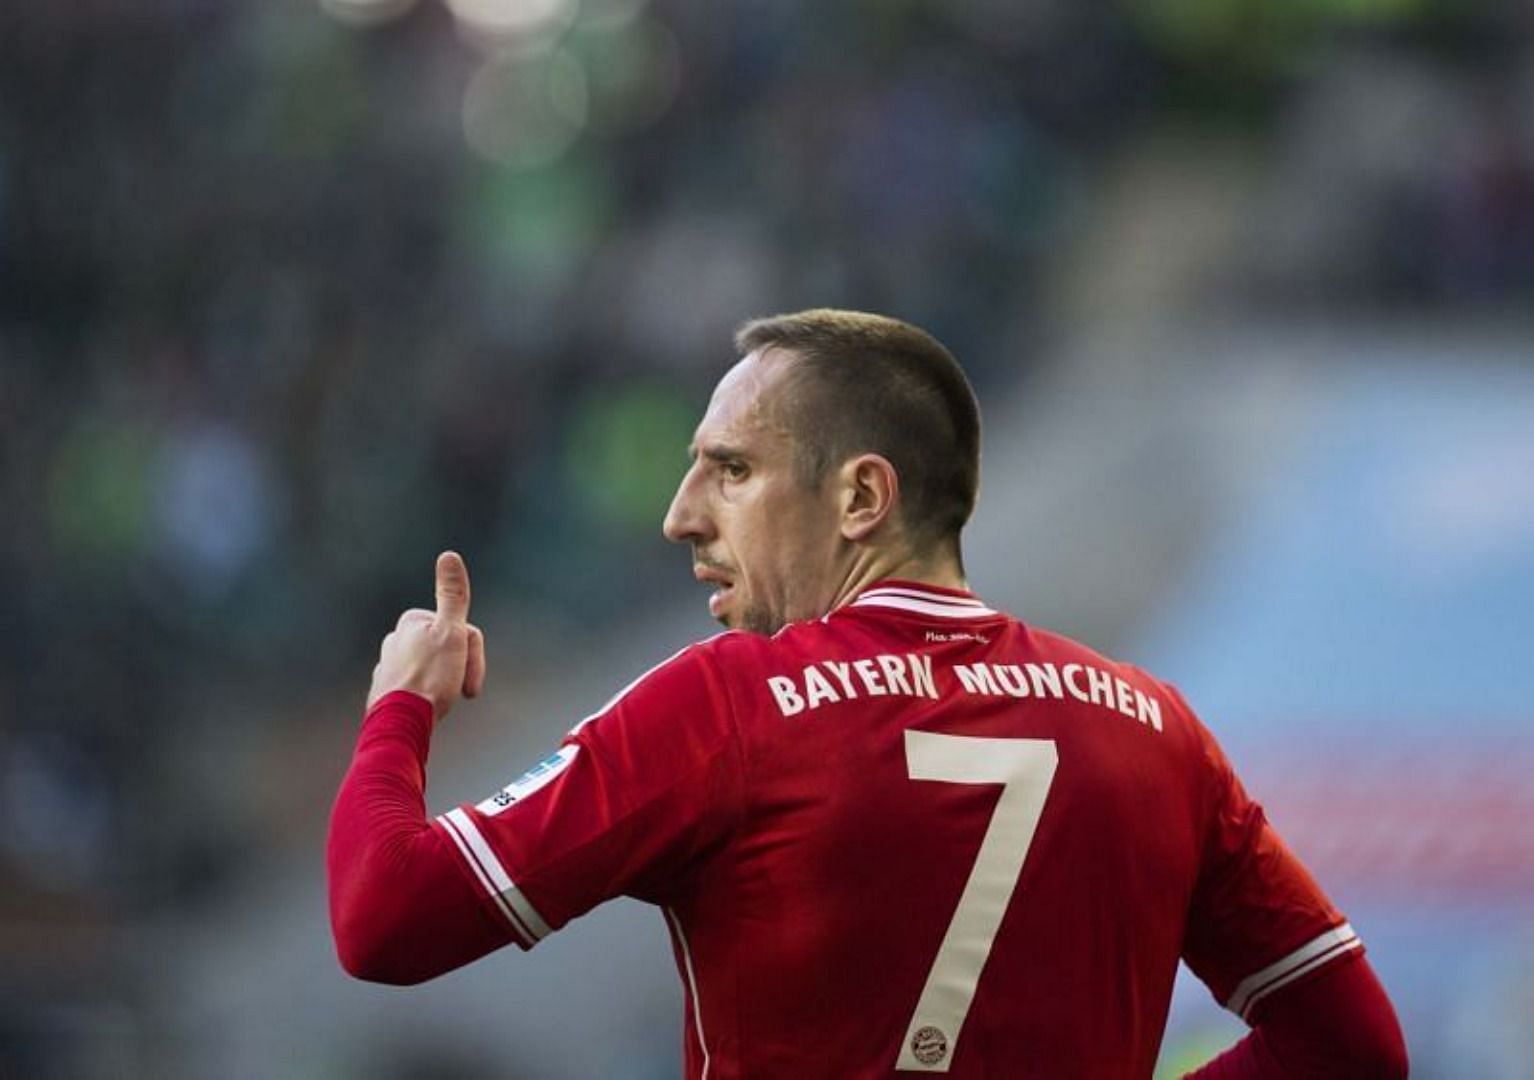 Ribéry formed a famous partnership with Arjen Robben for Bayern Munich.